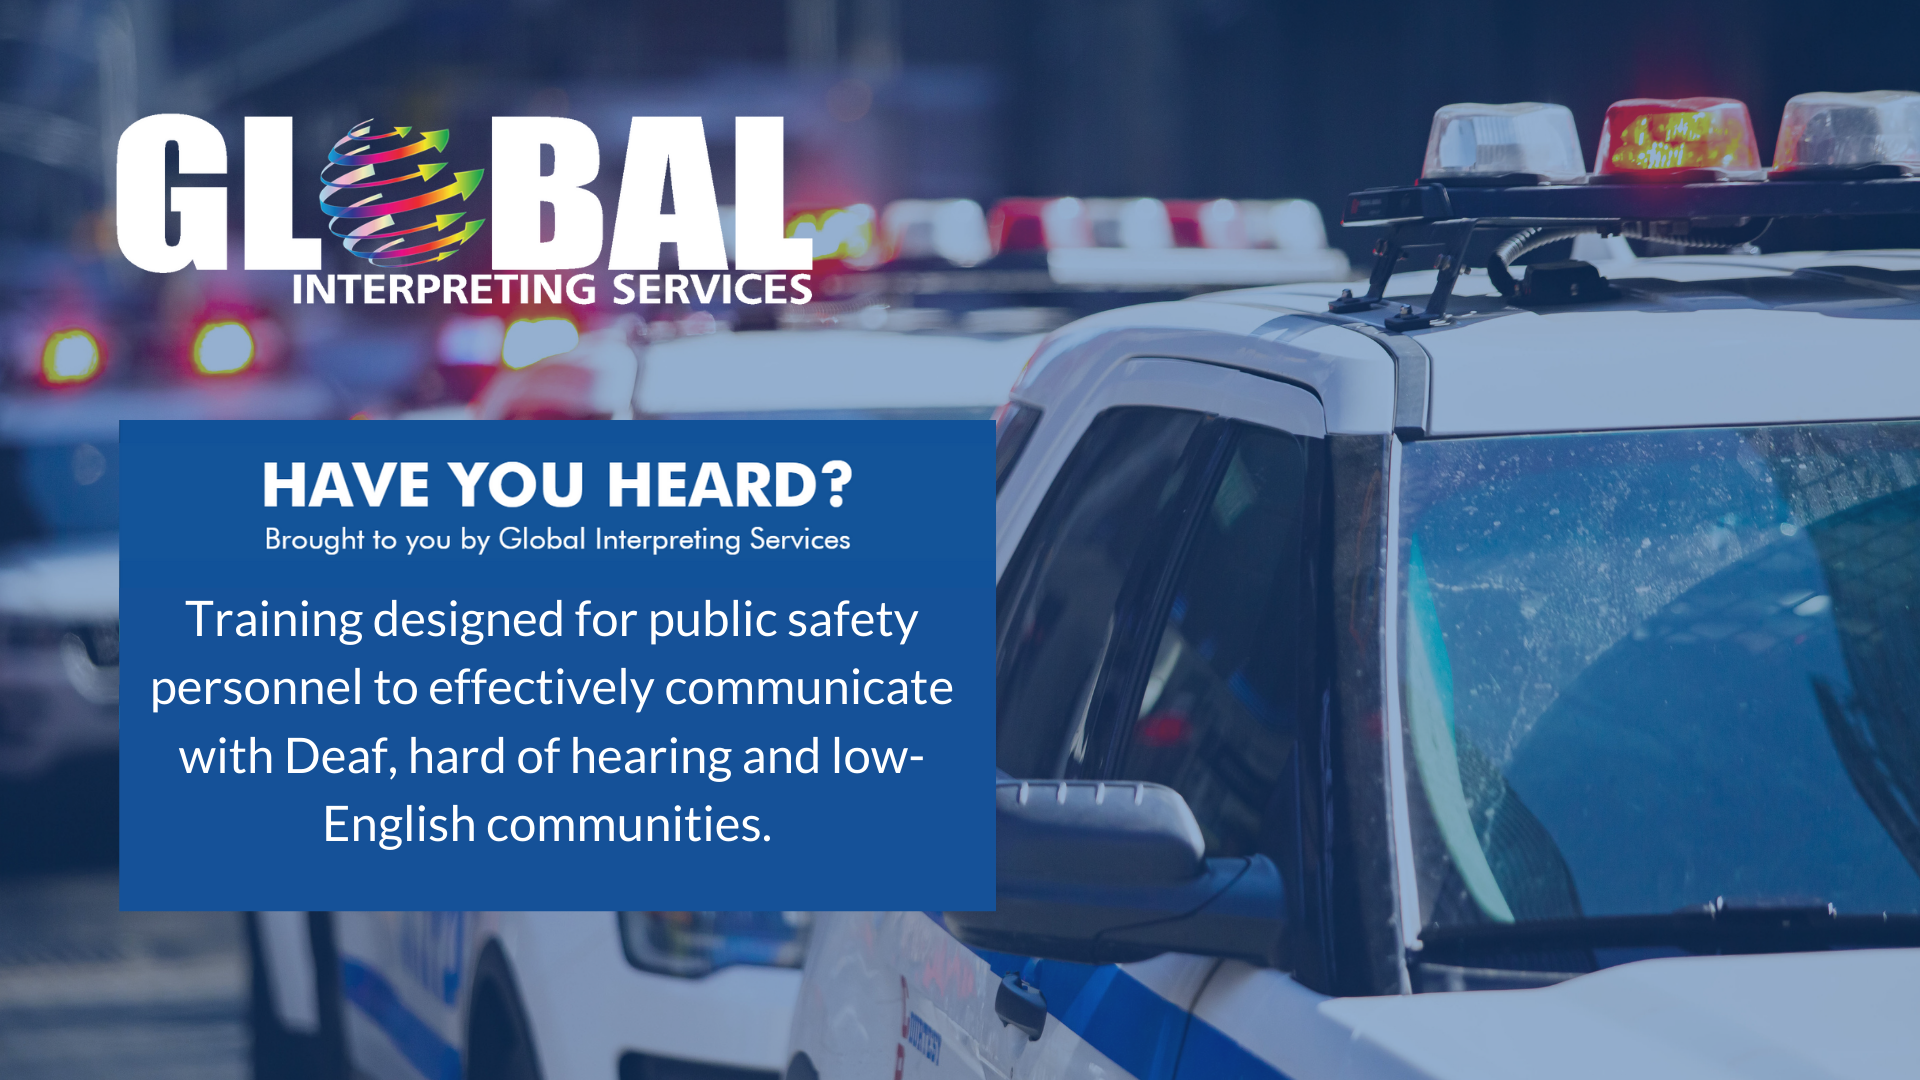 Image of police cars with the Global Interpreting logo in the left corner. In a blue box the text reads: Have You Heard? Brought to you by Global Interpreting Services Training designed for public safety personnel to effectively communicate with Deaf, hard of hearing and low-English communities. 